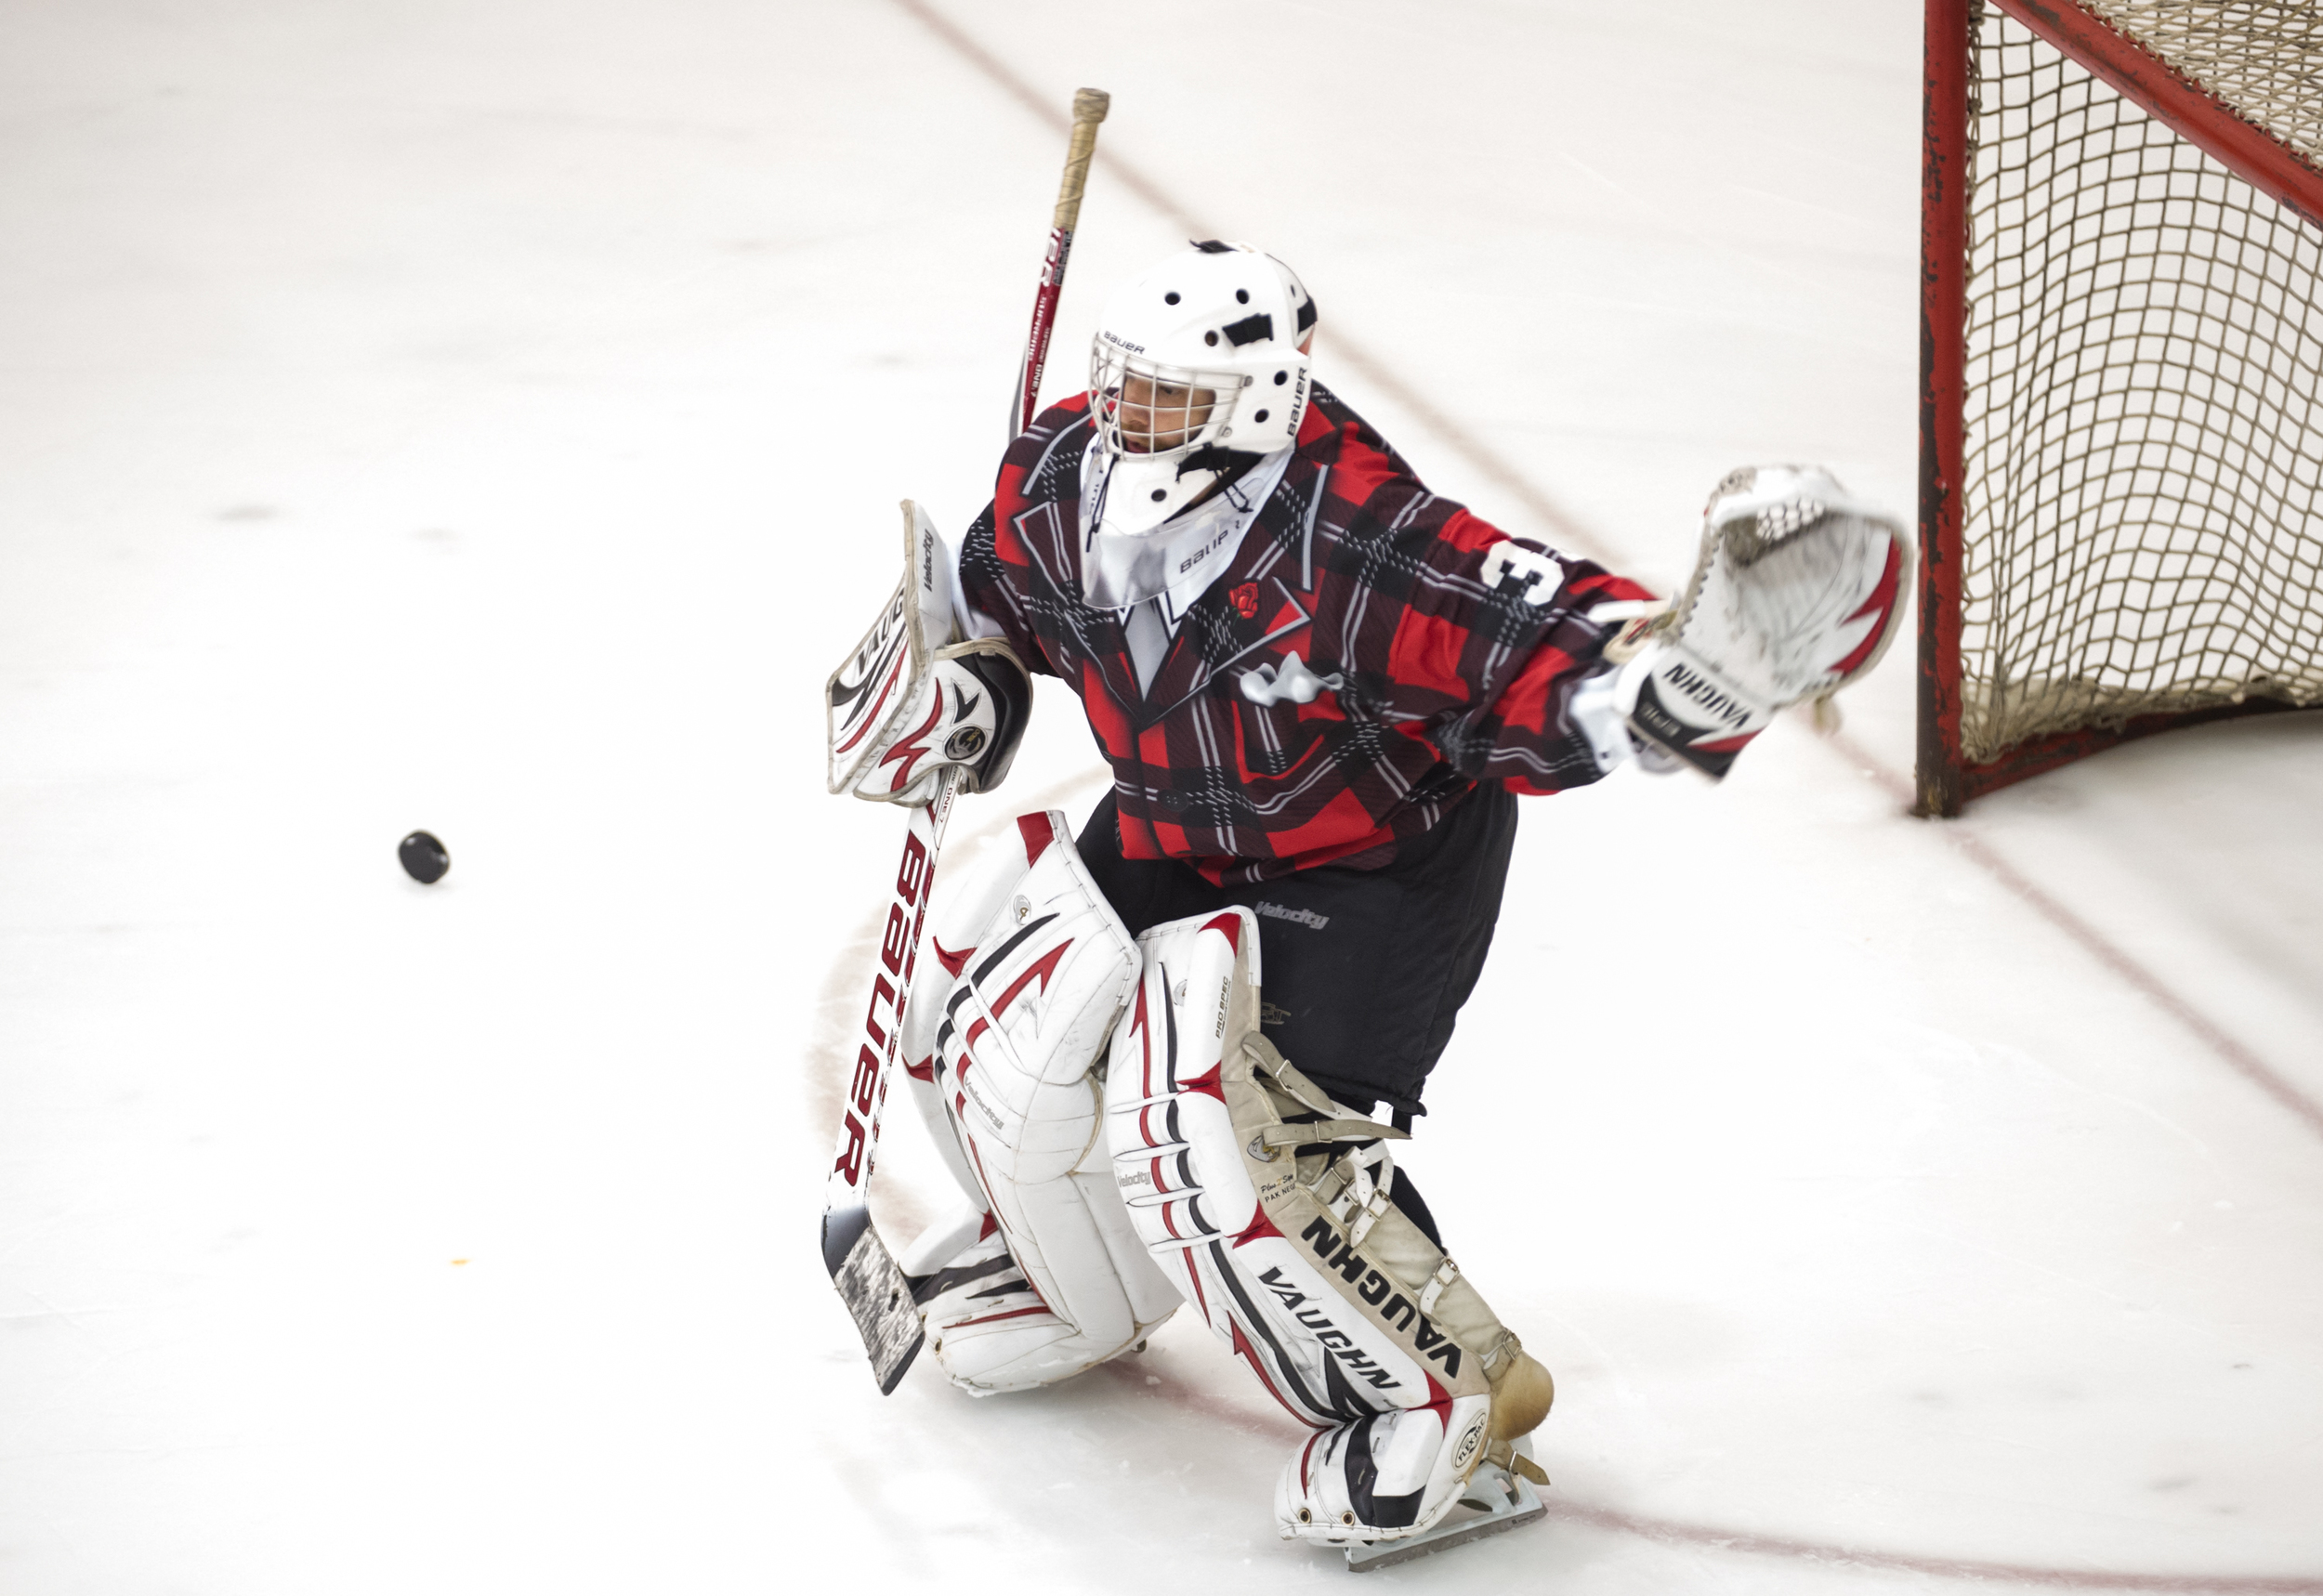 A goal keeper stares at an approaching puck during the Lion City Cup at the Rink.